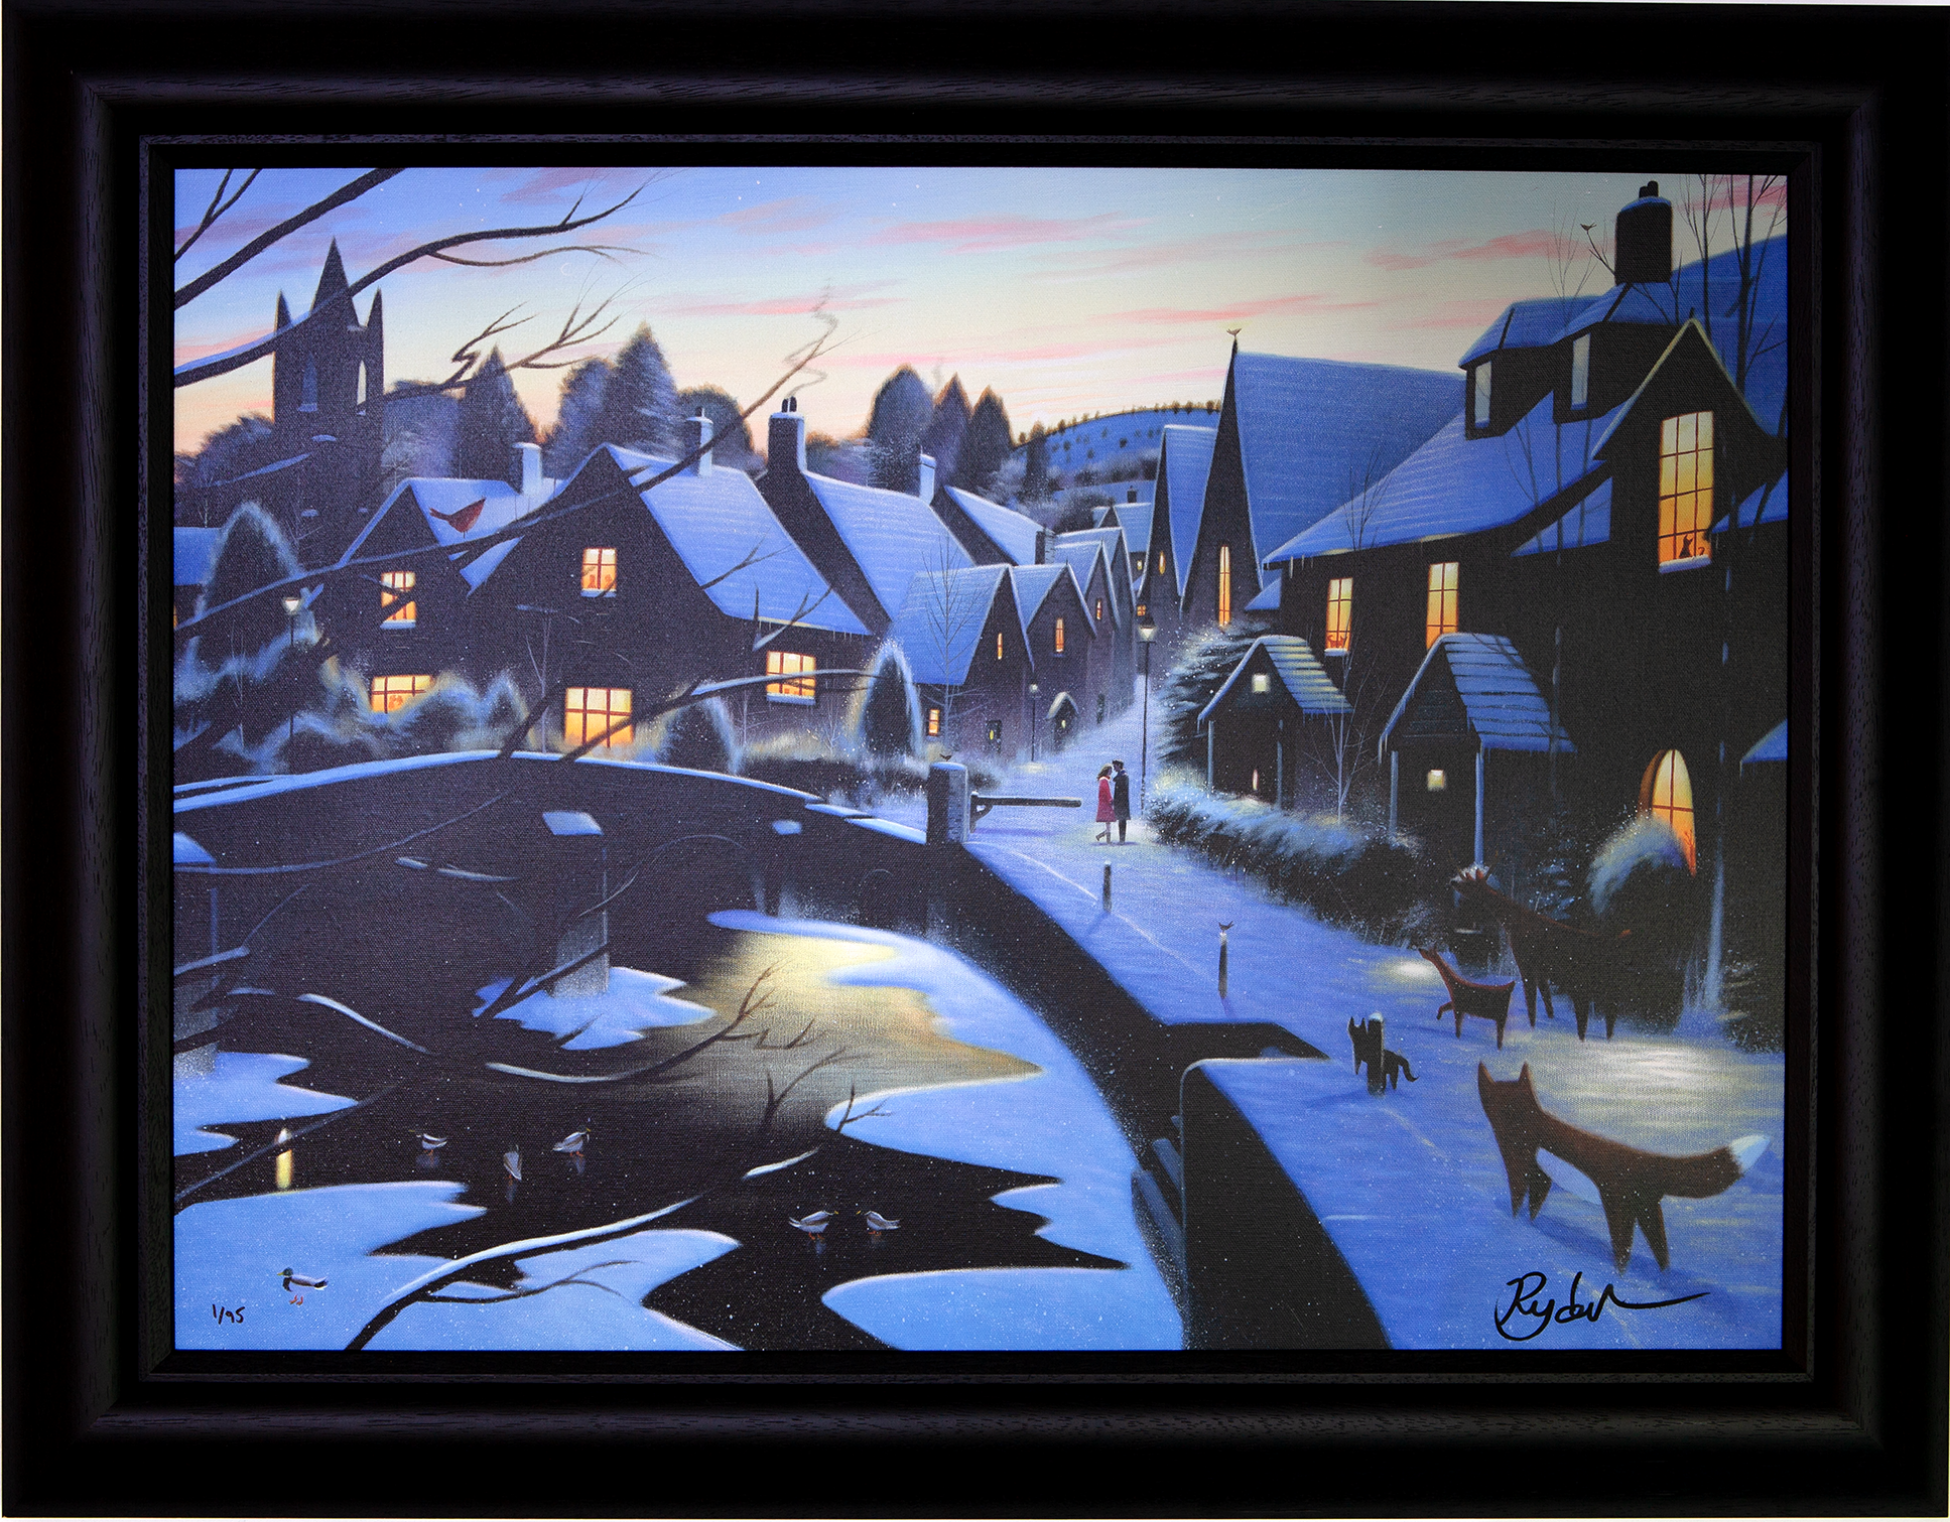 Ryder - 'Warm Hearts And Winter Skies' - Framed Limited Edition Art